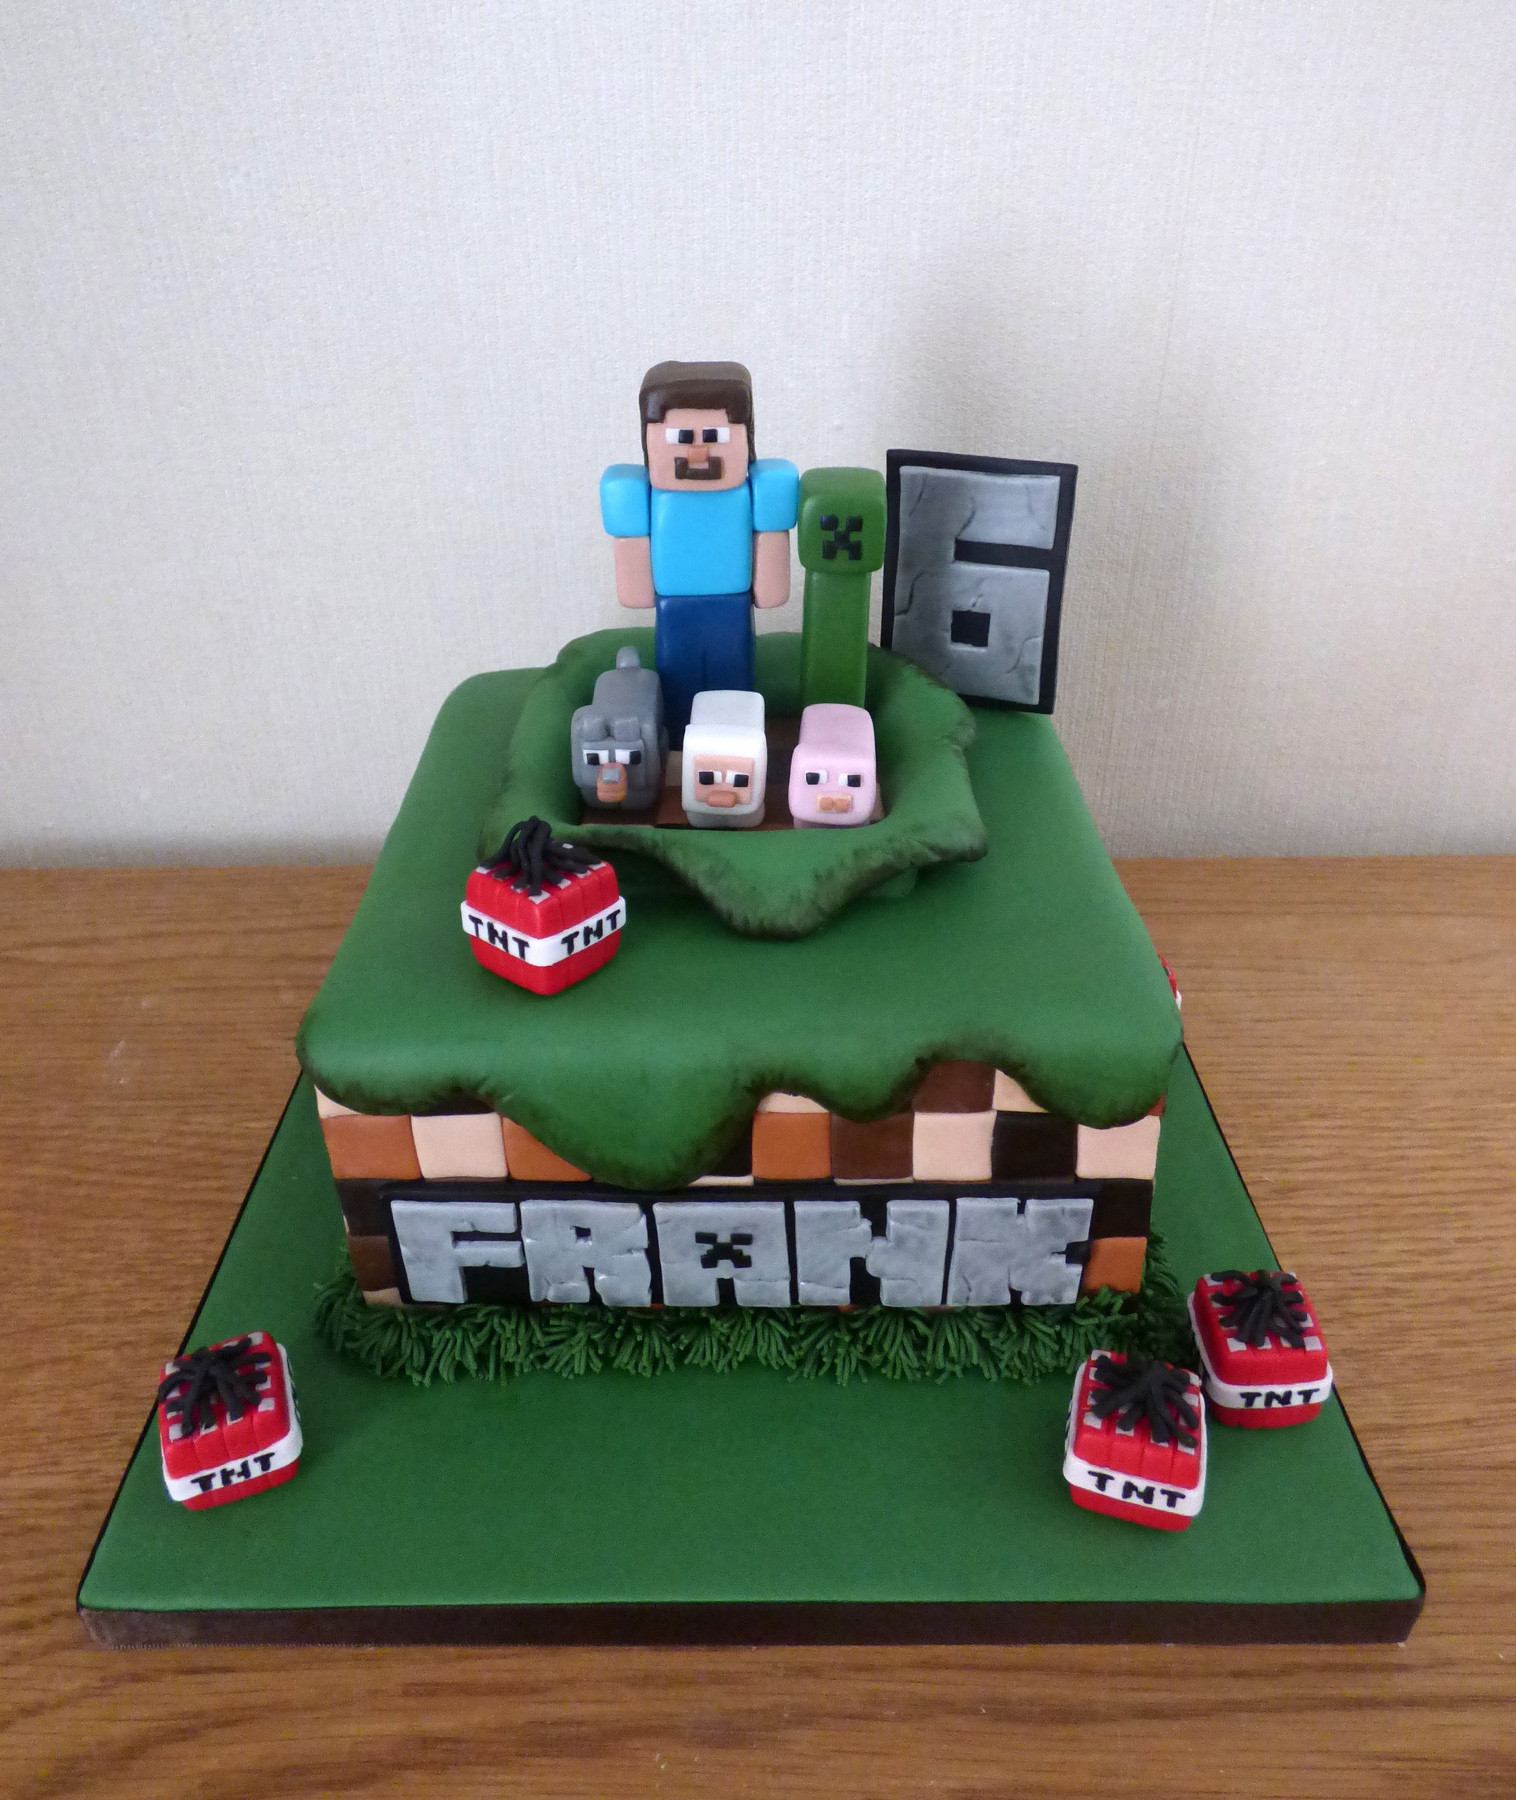 Minecraft Birthday Cake In The Way You Love - YouTube